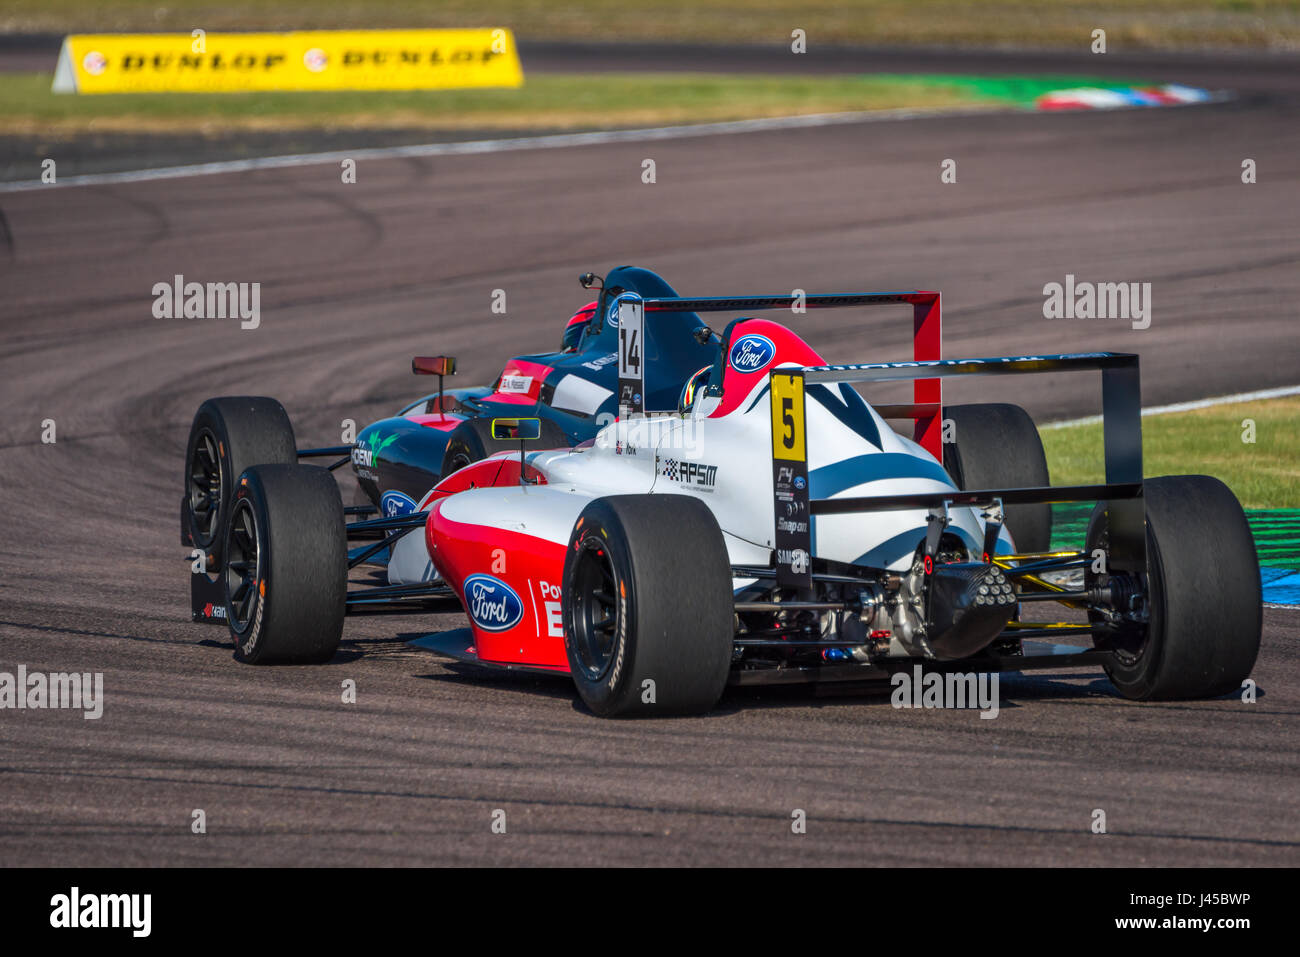 Formula Four Racing Driver Oliver York competing at Thruxton Circuit, Hampshire, on Sunday 7th May 2017. Stock Photo